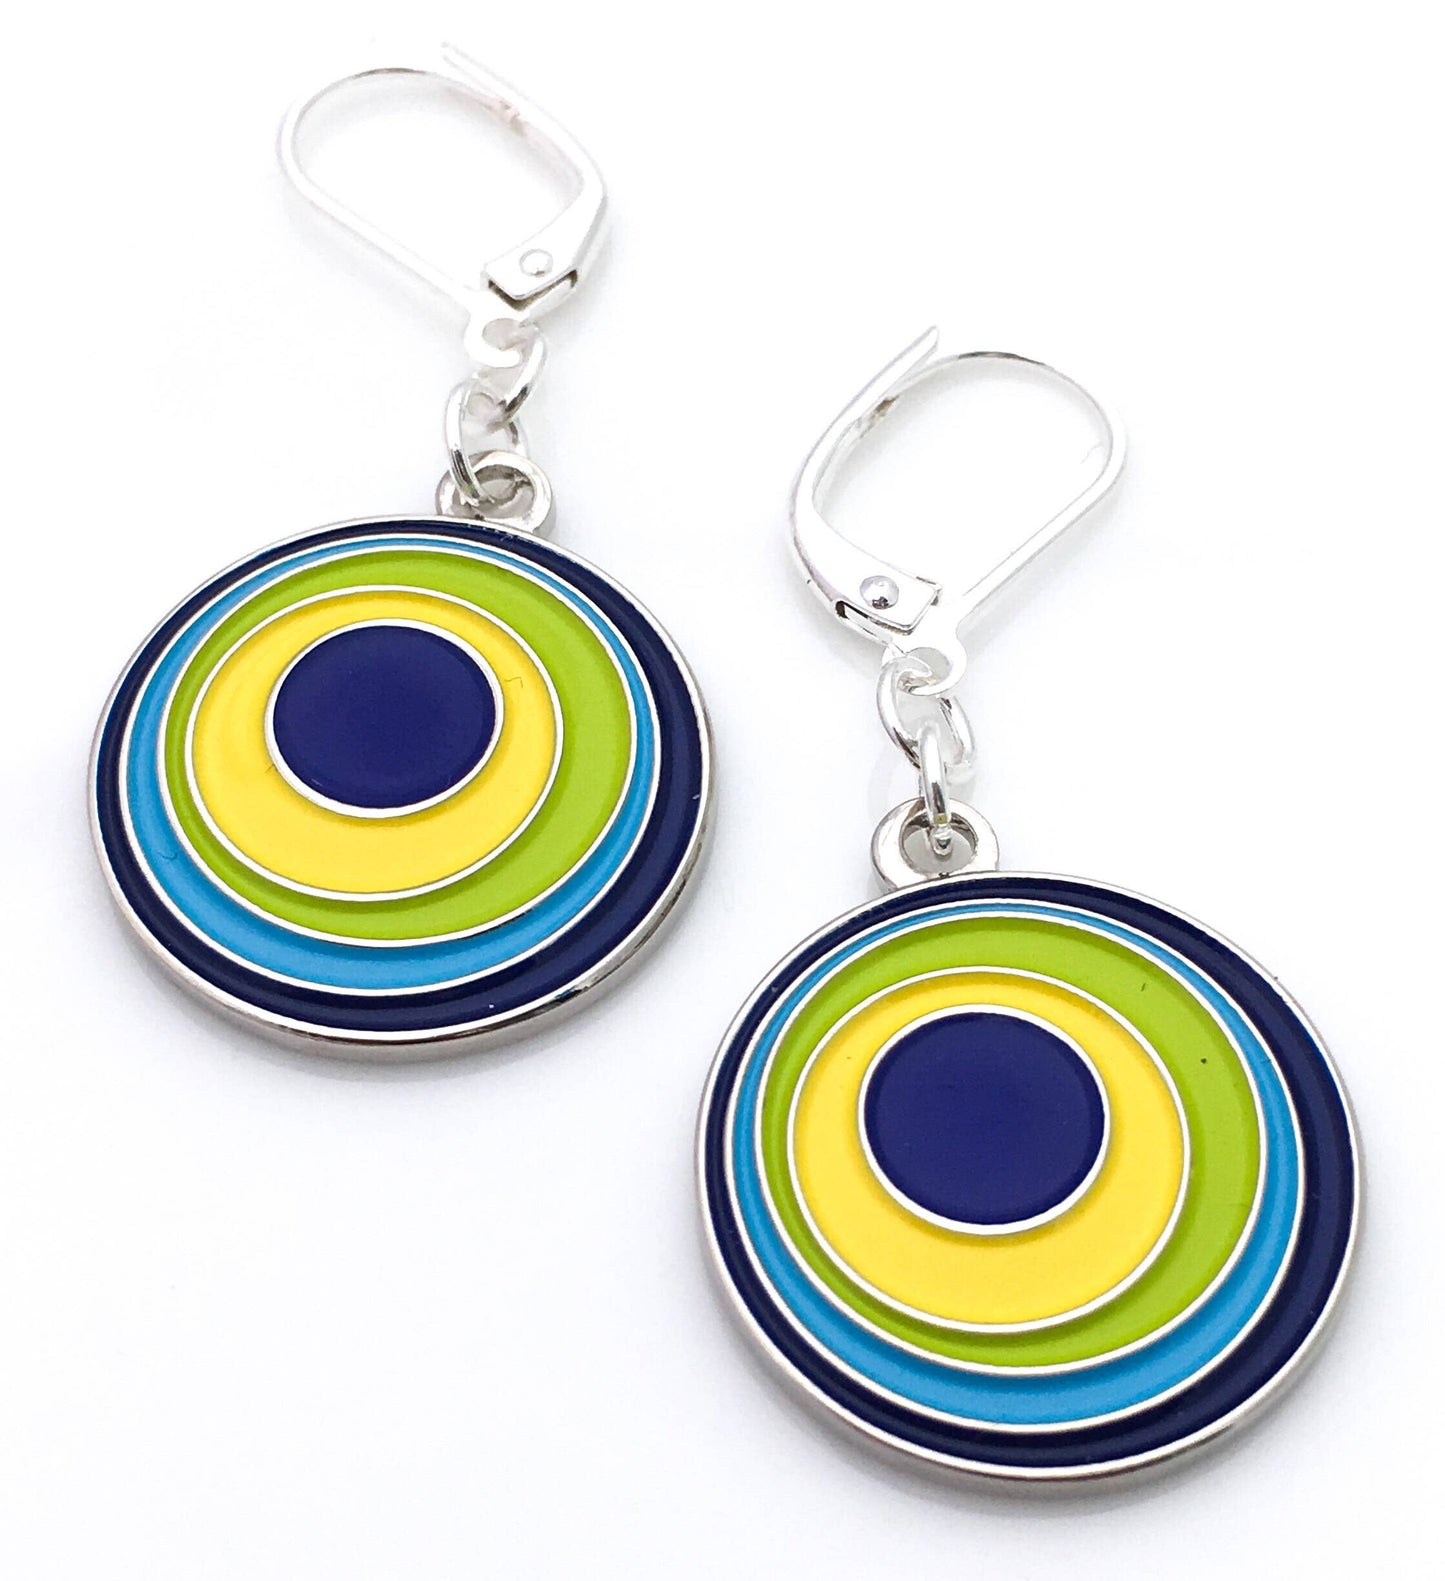 Round earrings with circles within circles blue and yellow